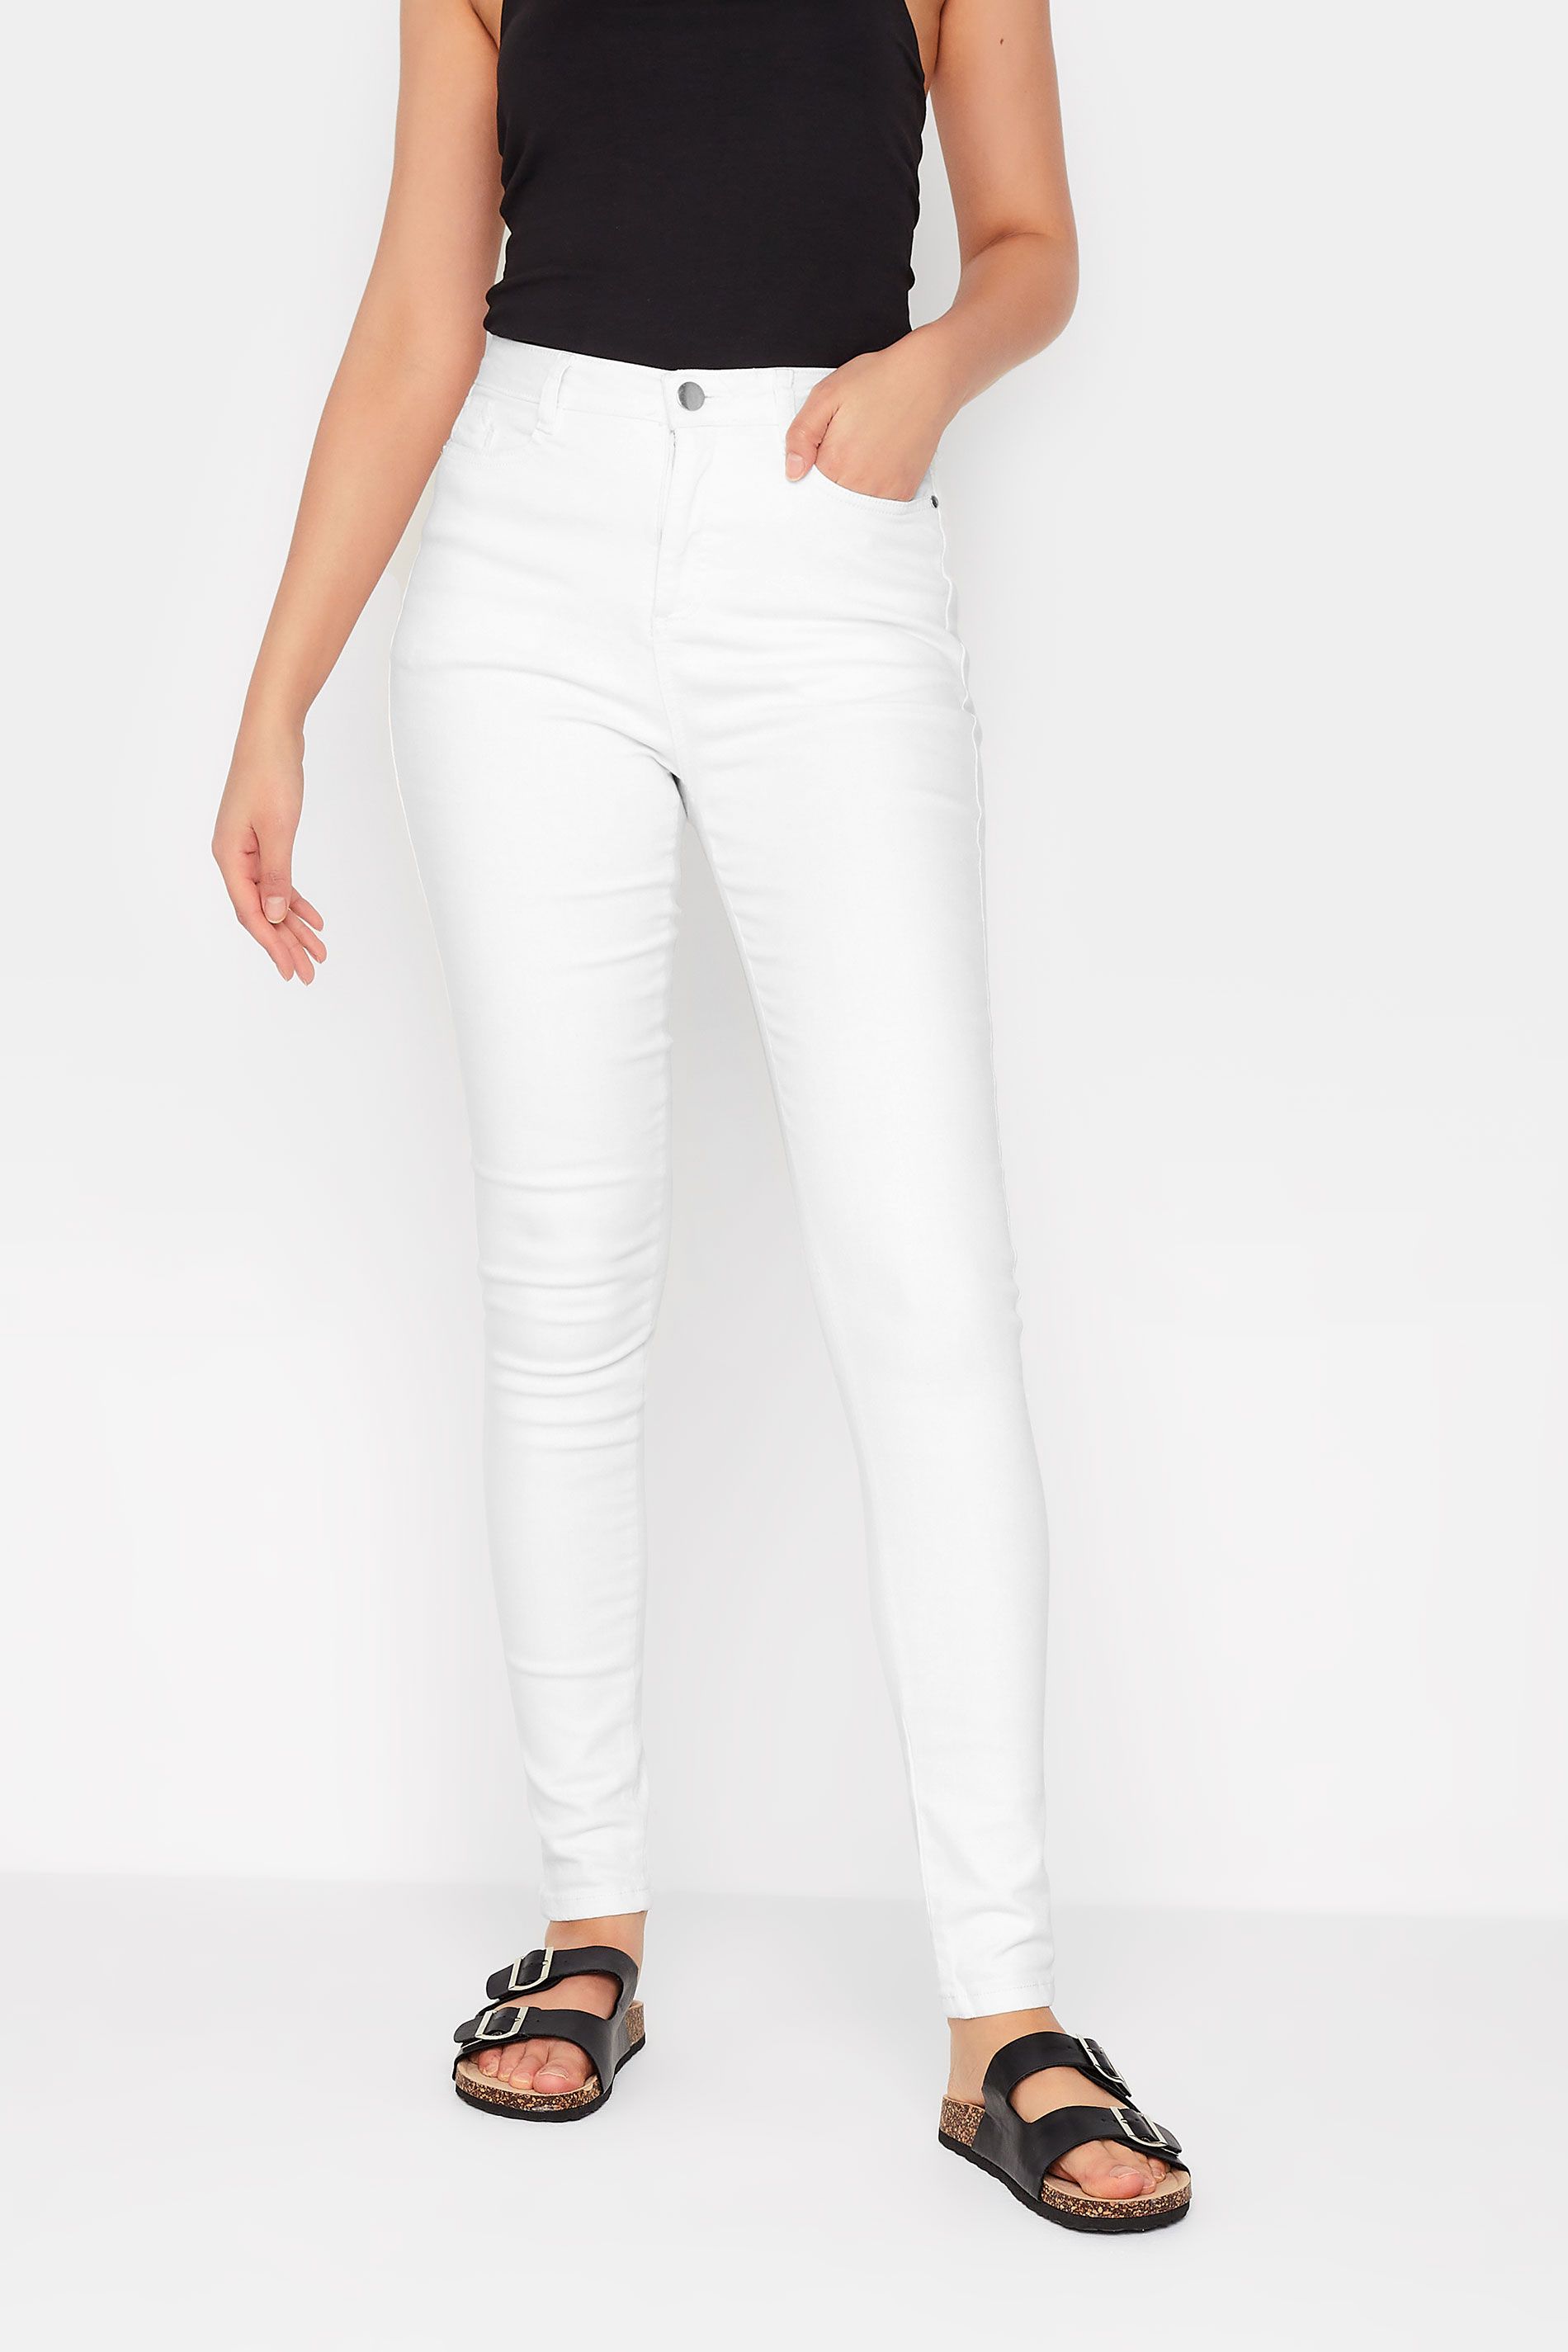 LTS Tall White AVA Stretch Skinny Jeans | Long Tall Sally